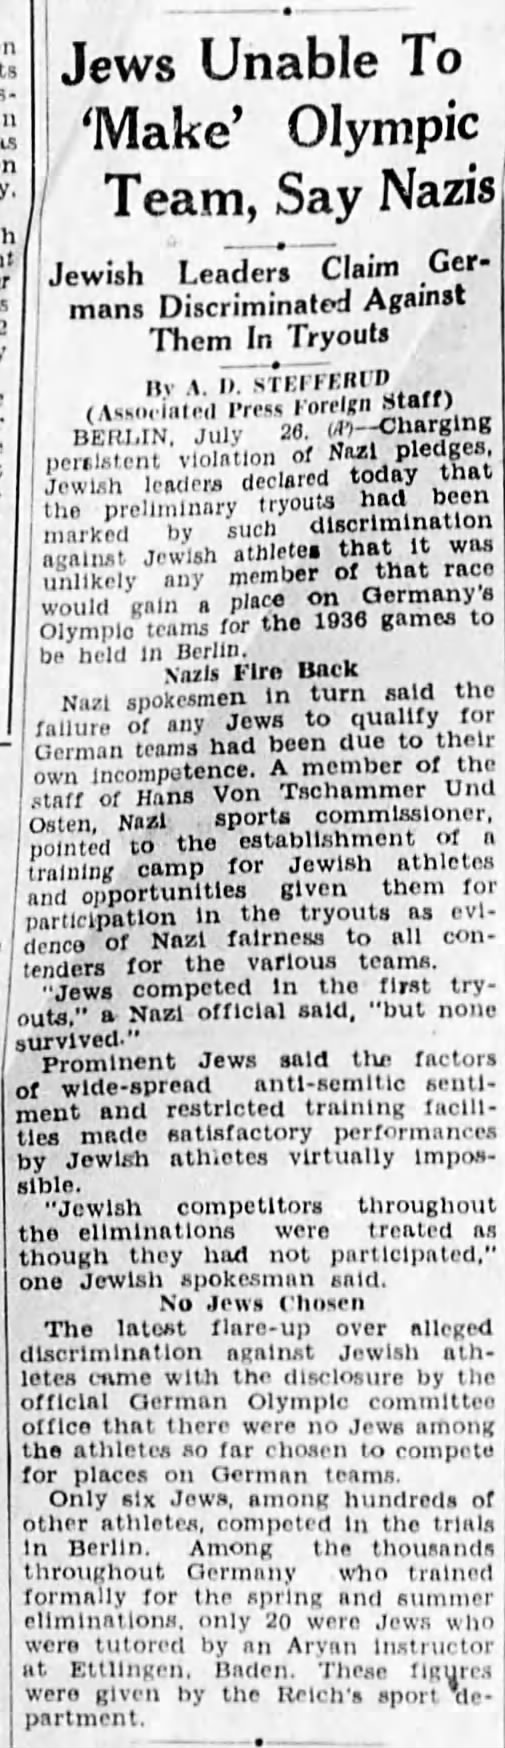 Jews Unable to 'Make' Olympic Team, Say Nazis